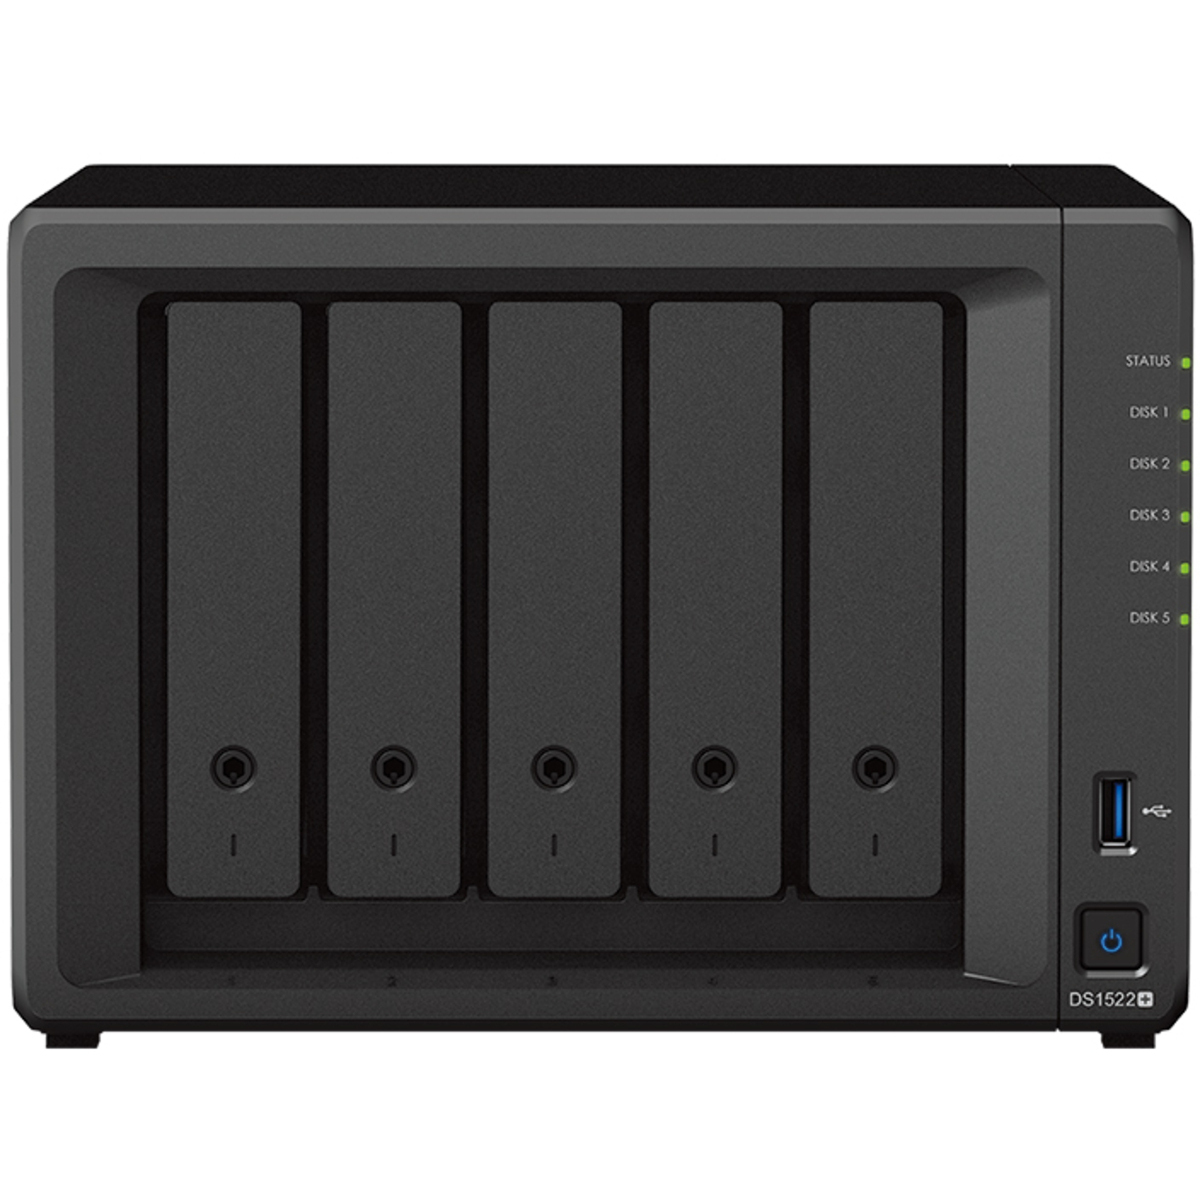 Synology DiskStation DS1522+ 20tb 5-Bay Desktop Multimedia / Power User / Business NAS - Network Attached Storage Device 5x4tb Western Digital Red SA500 WDS400T1R0A 2.5 560/530MB/s SATA 6Gb/s SSD NAS Class Drives Installed - Burn-In Tested - ON SALE DiskStation DS1522+